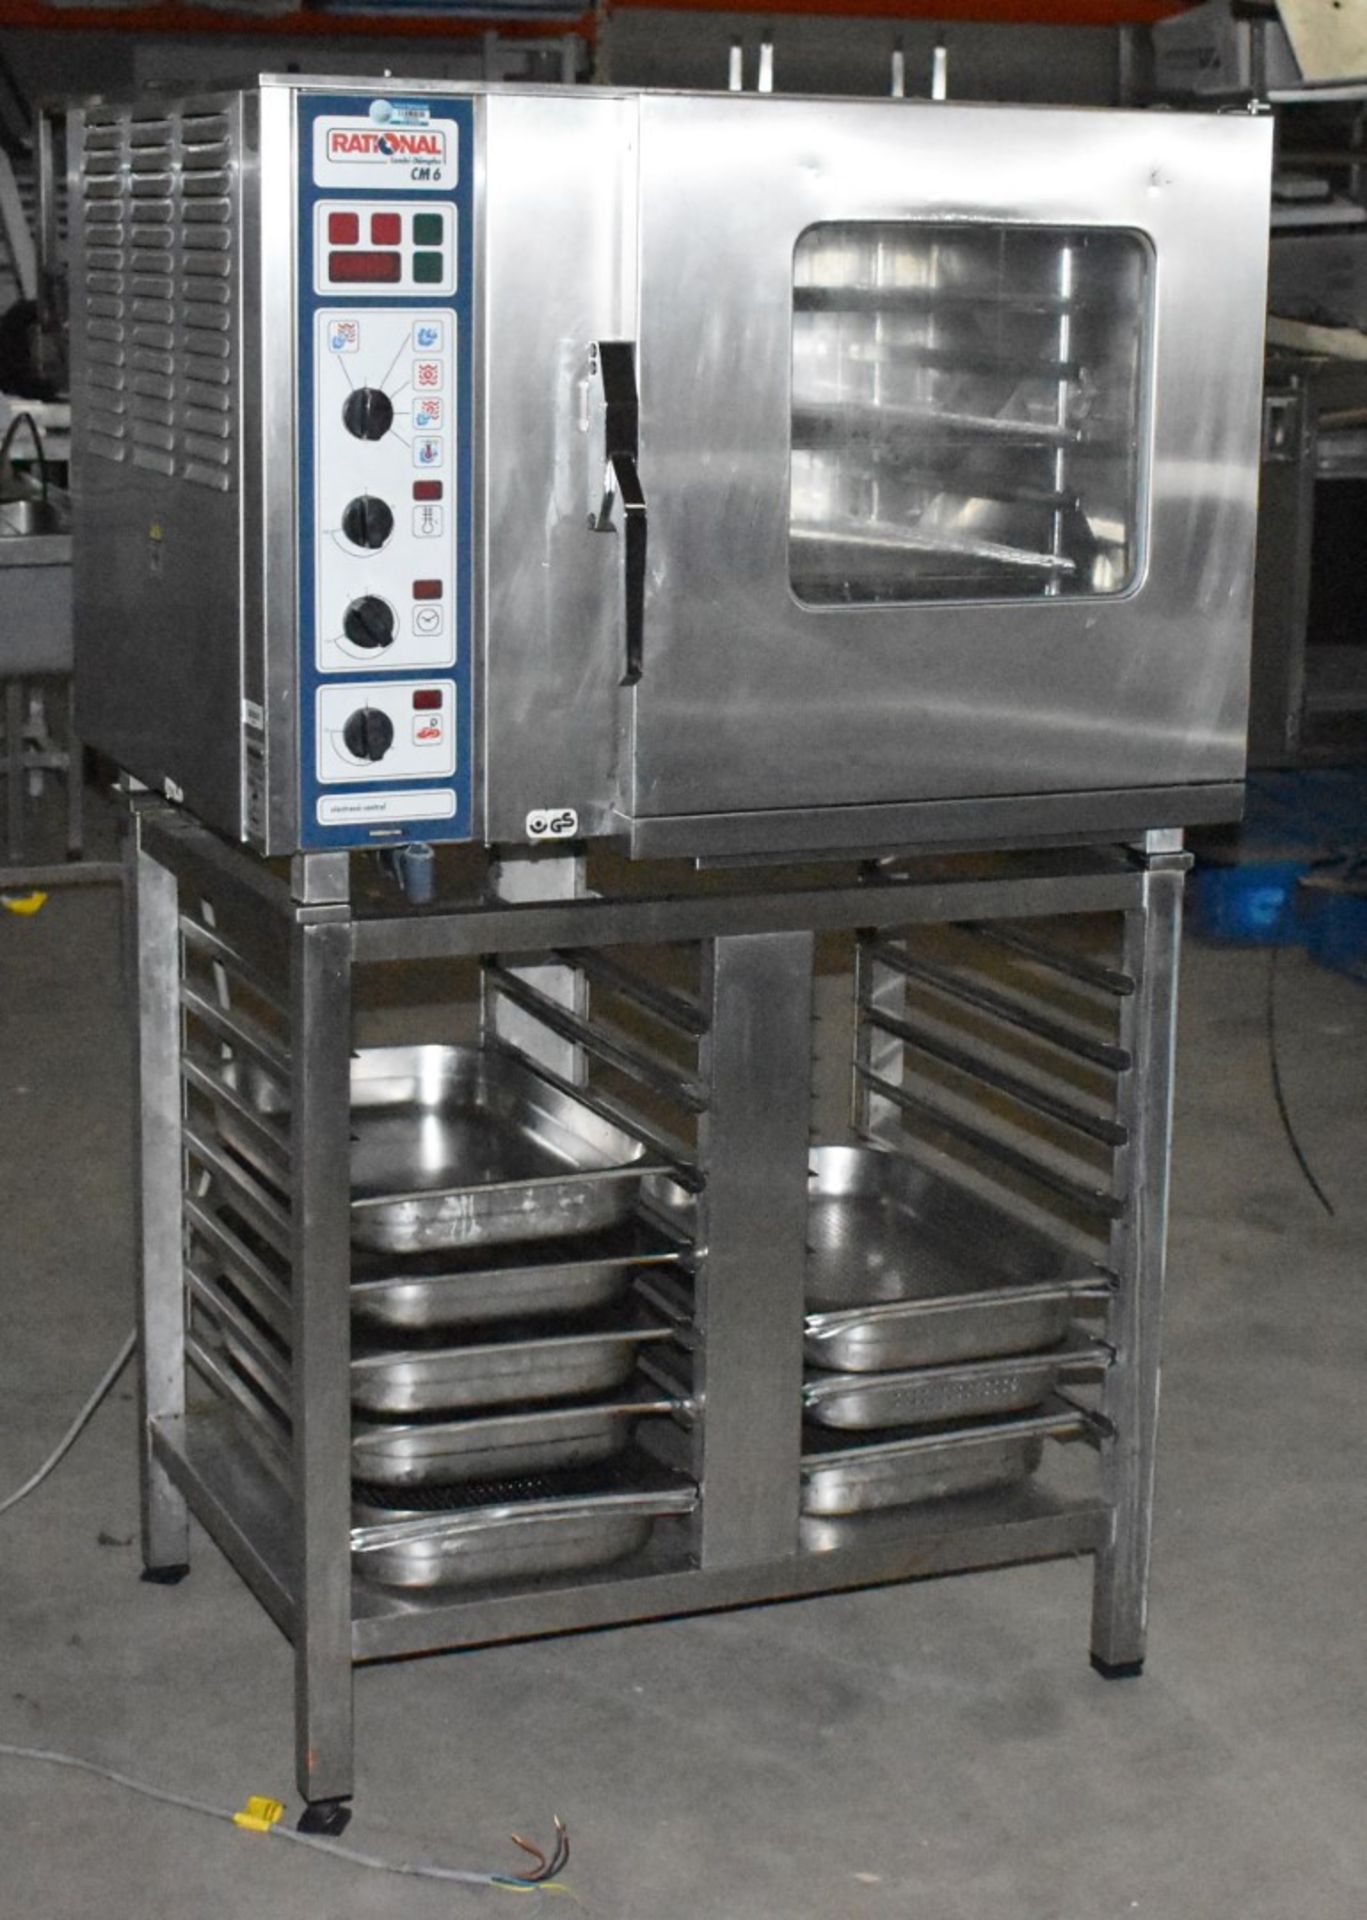 1 x Rational CM 6 9.4k 6 Grid Combi Steam Oven With Stand - H148 x W90 x D73 cms - CL453 - Location: - Image 2 of 14